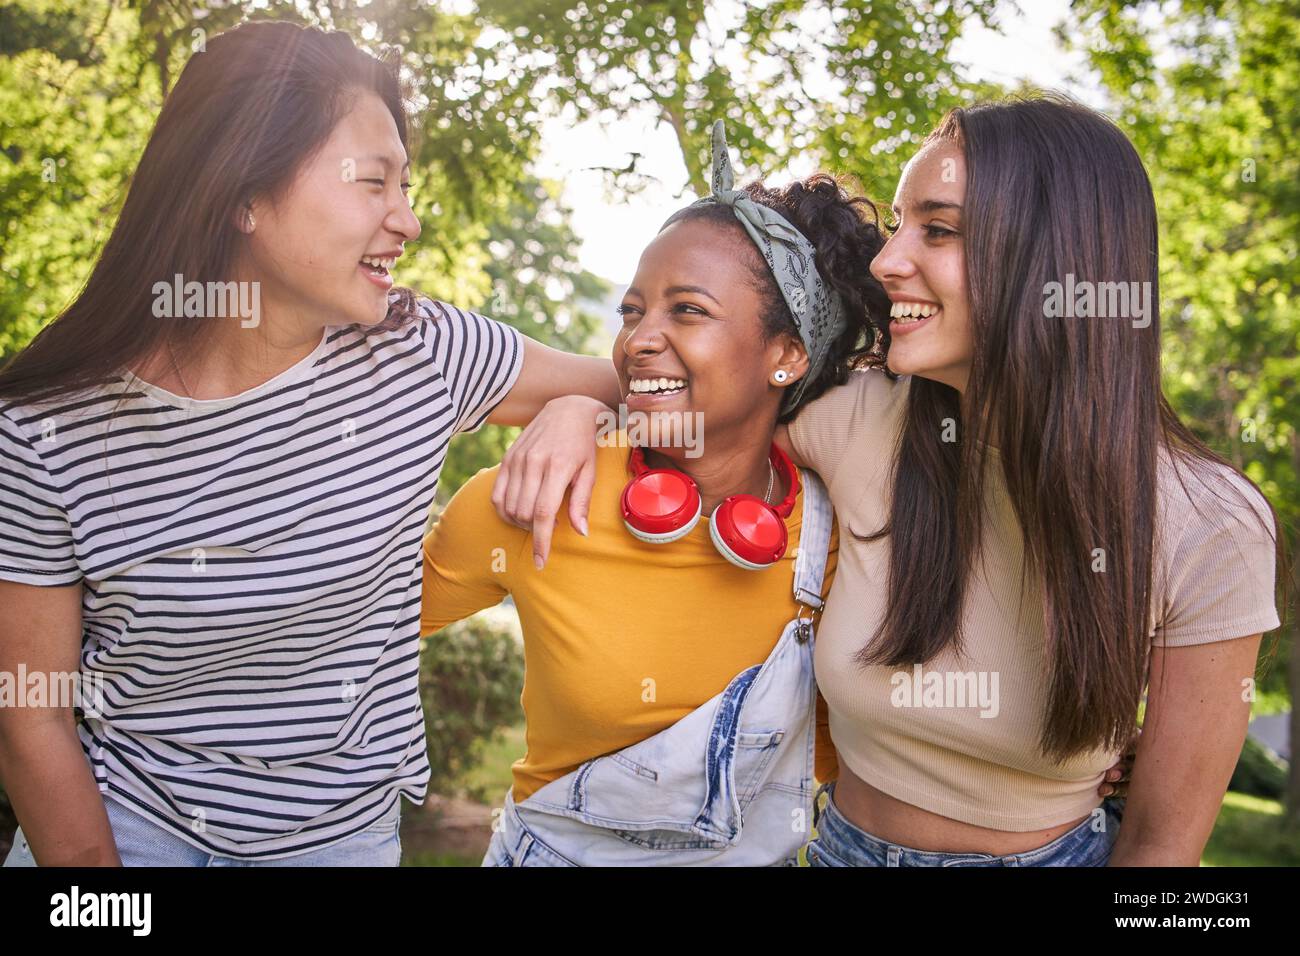 Group of young multicultural nice women laughing enjoying standing together in park on sunny day. Stock Photo